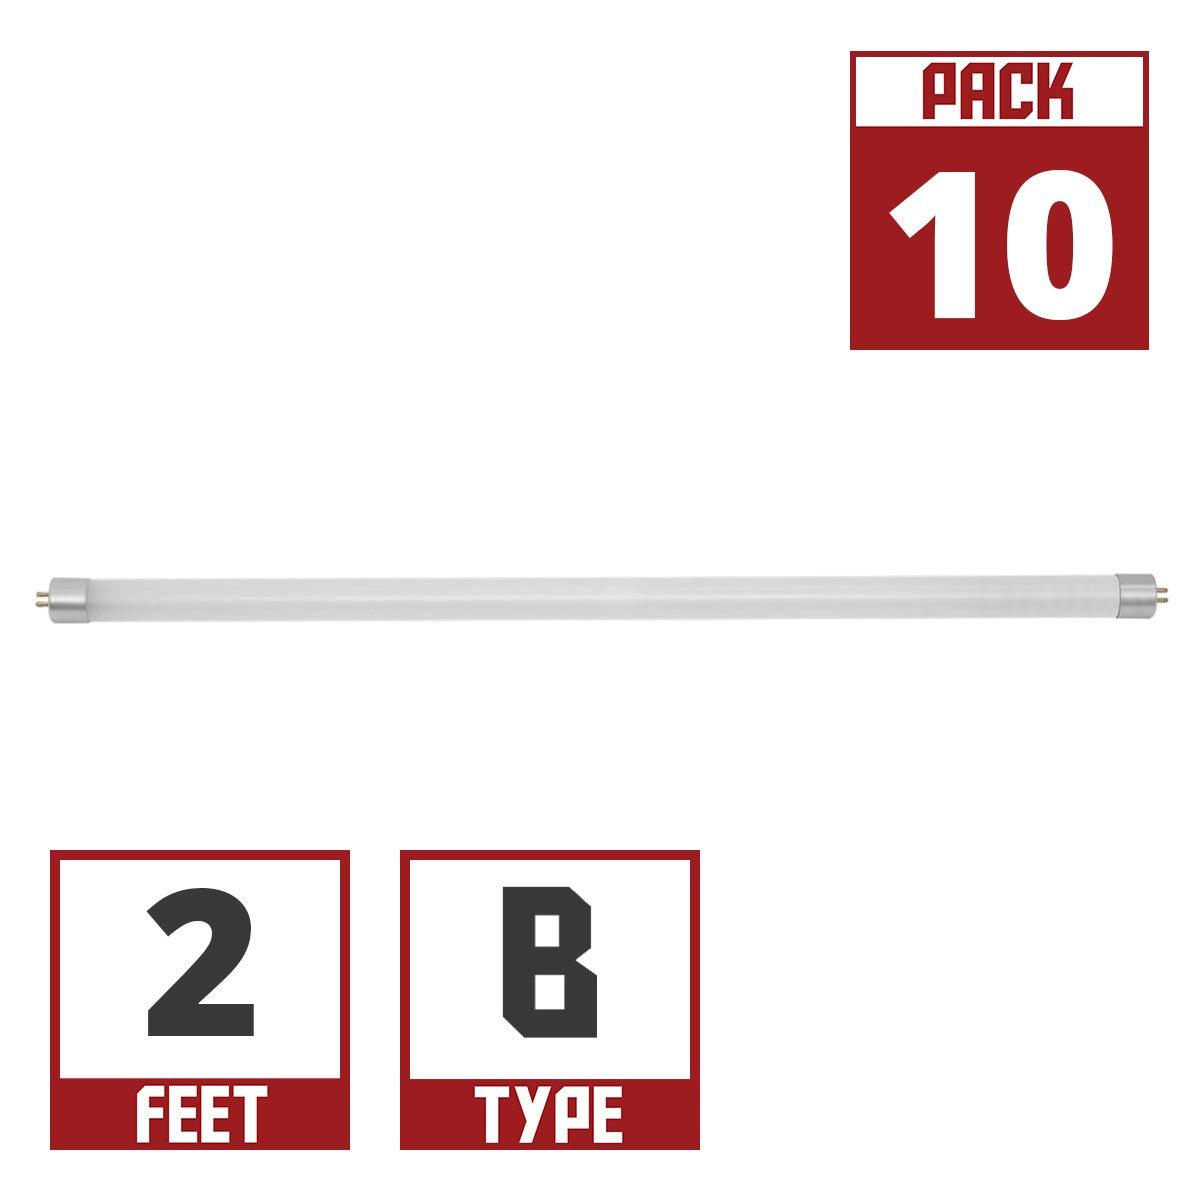 21 Inch LED mini T5 Tube, 7 Watt, 700 Lumens, 4000K, F13T5 Replacement, Ballast Bypass, Double End, G5 Base (Case Of 10) - Bees Lighting